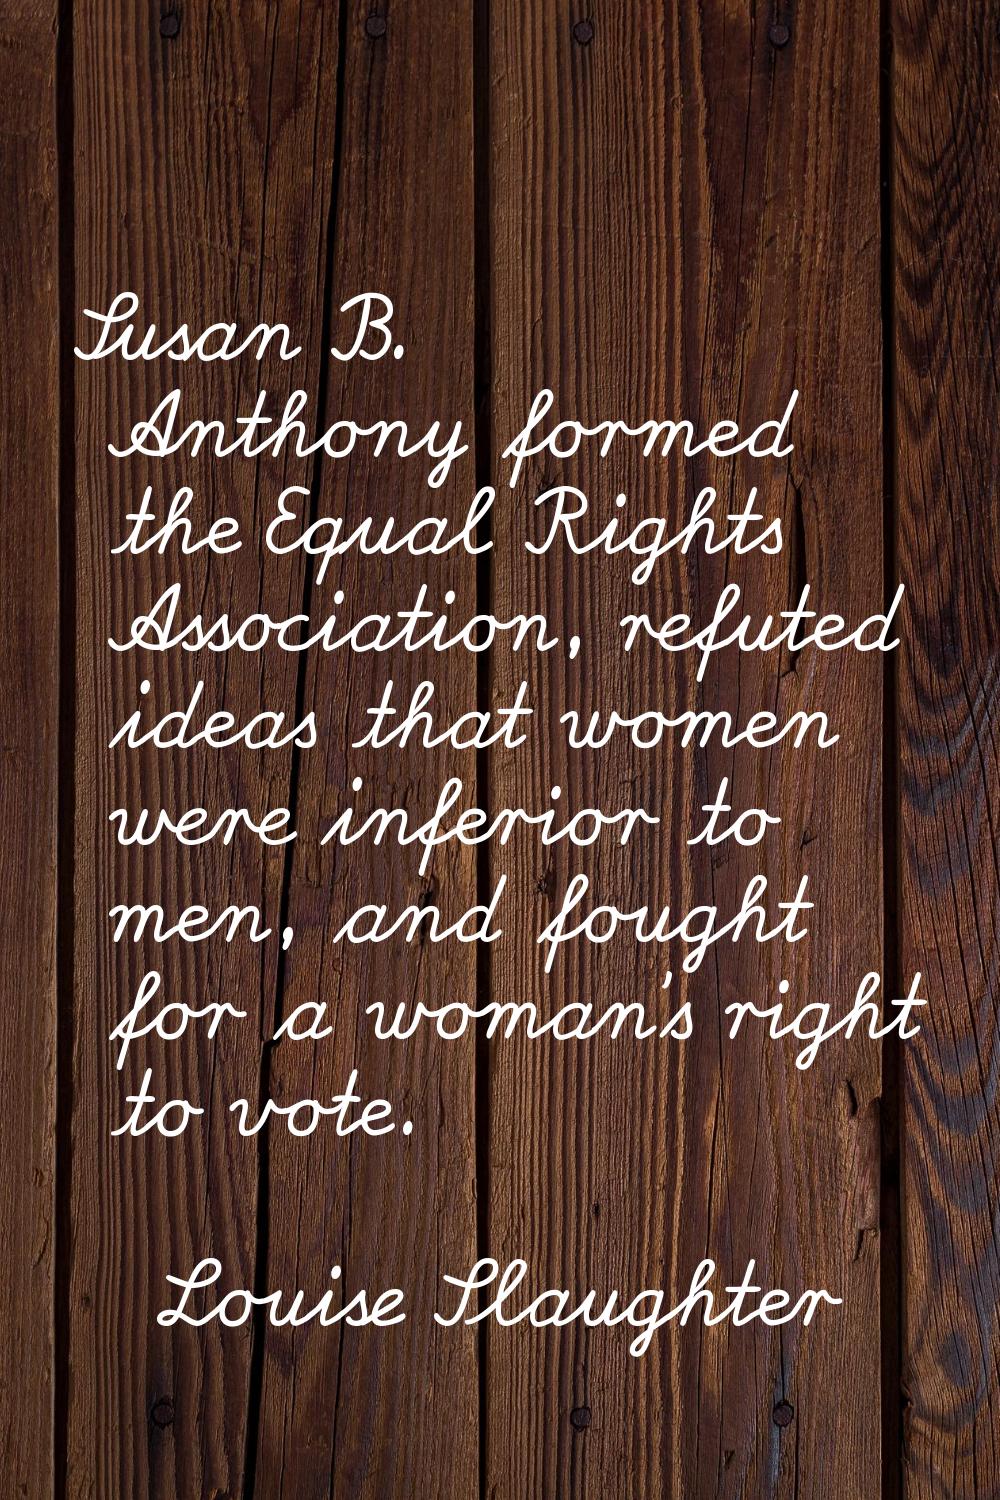 Susan B. Anthony formed the Equal Rights Association, refuted ideas that women were inferior to men